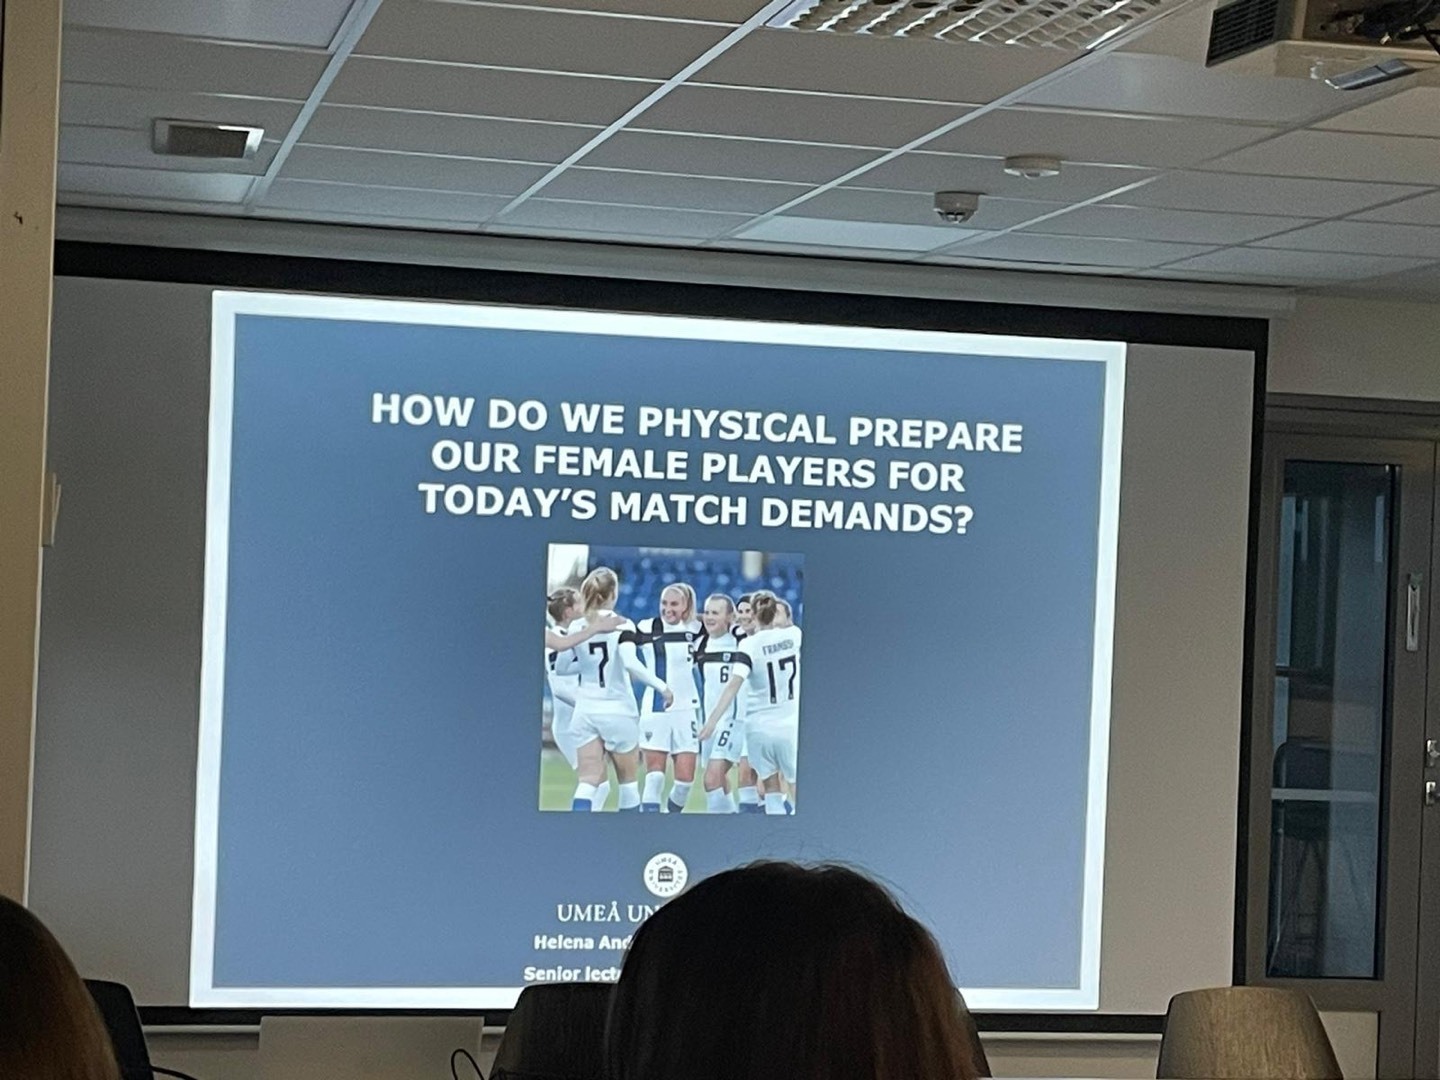 “How do we physically prepare our female players for today’s match demands?”